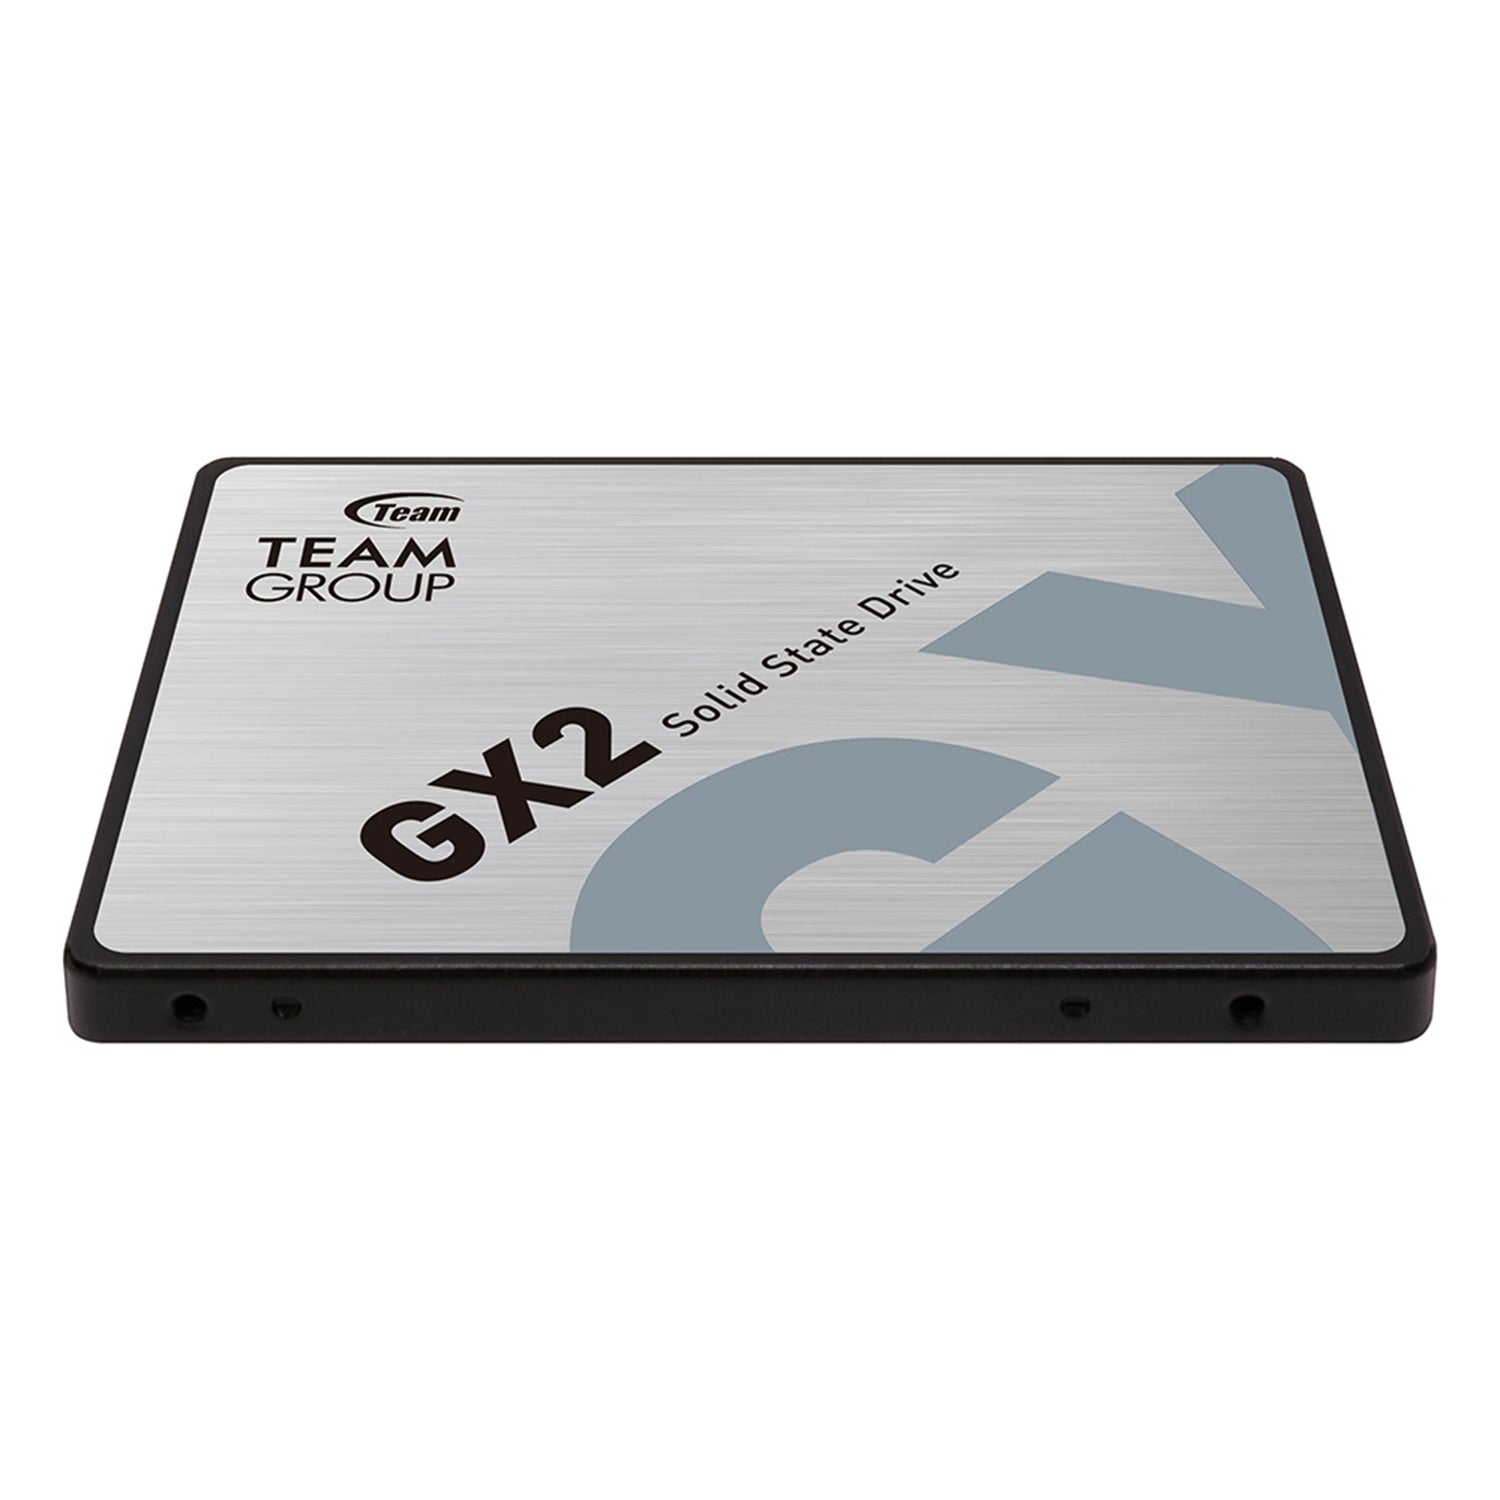 TEAMGROUP GX2 512GB Internal SSD with Graphene Heat Dissipation Solution | SATA III 6Gb/s Interface | 2.5 Inch Form Factor for Laptop, Desktop PC (T253X2512G0C101)